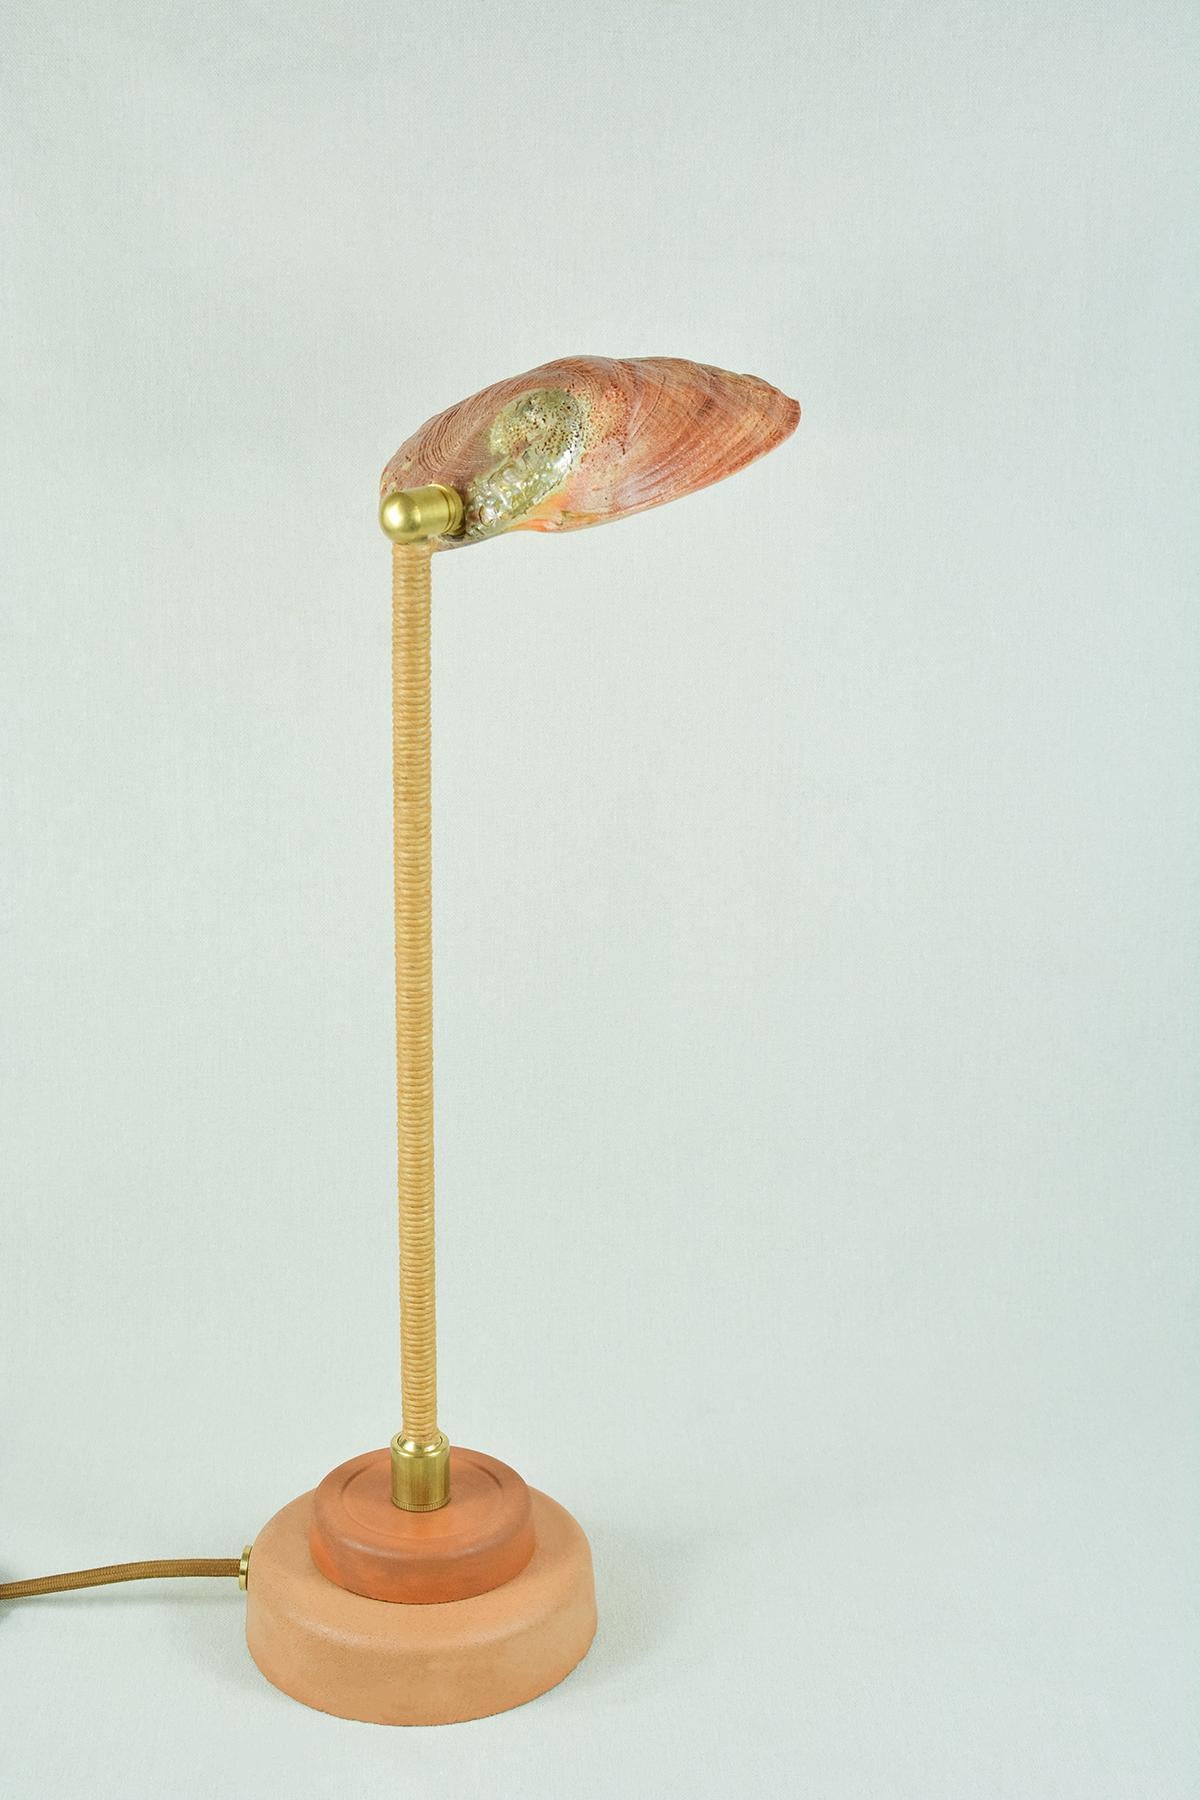 Cast Modernist 'Abalone Lawyer's Lamp' with Real Vintage Abalone Seashell Shade For Sale